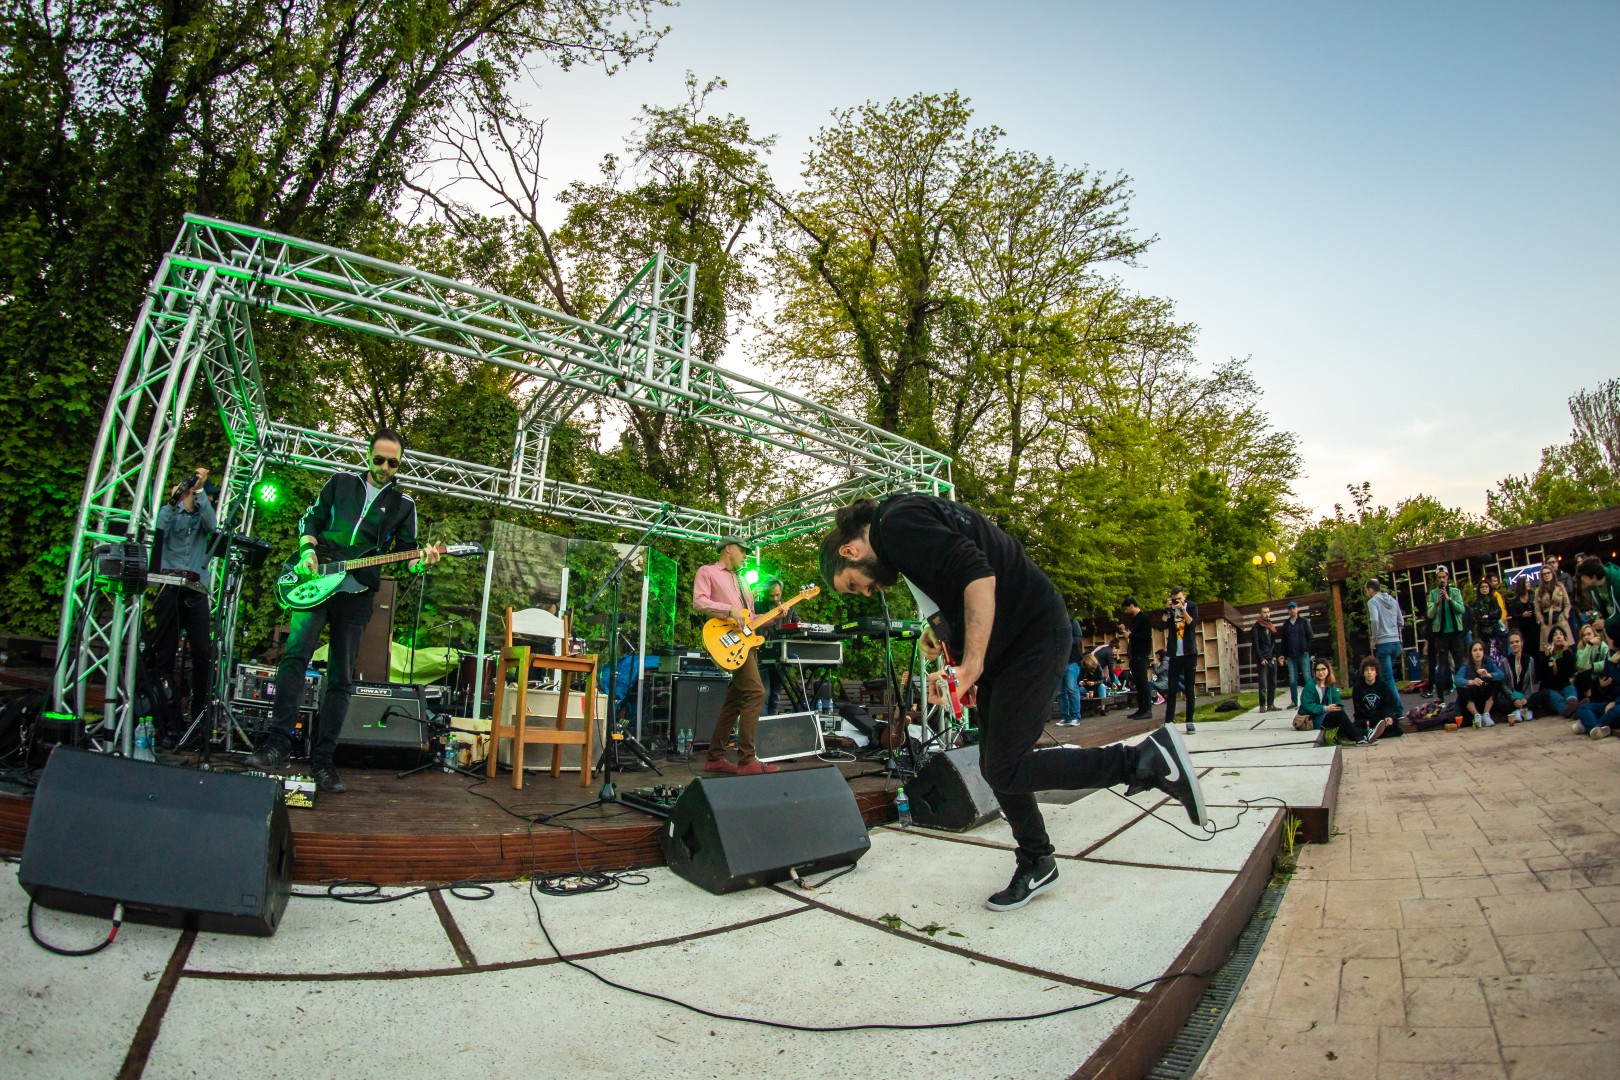 Robin And The Backstabbers at Grădina Floreasca in Bucharest on May 1, 2019 (f8de67b873)